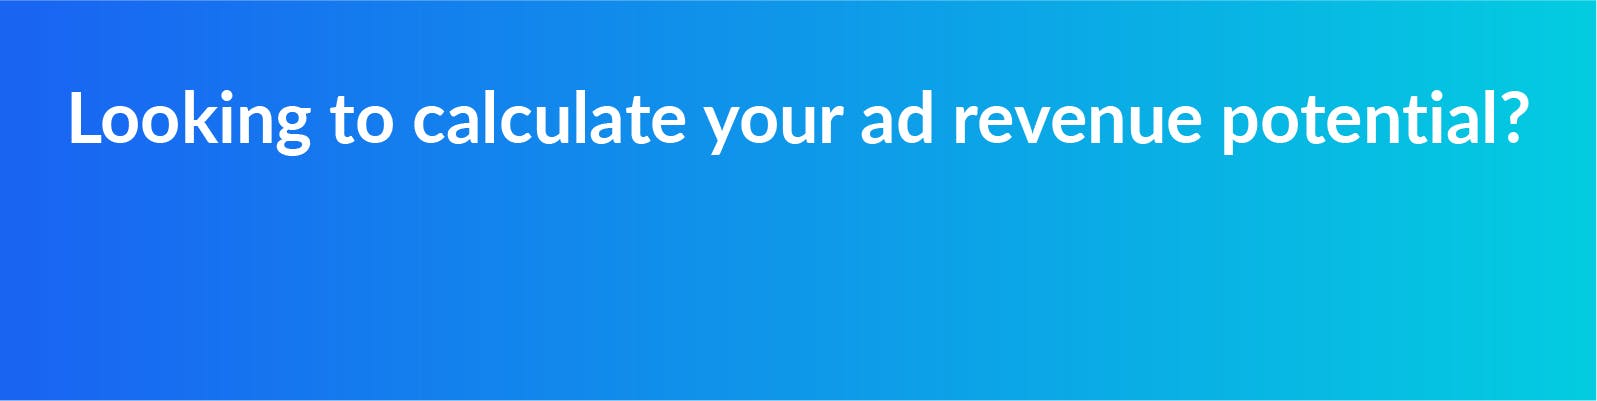 Want to calculate your ad revenue